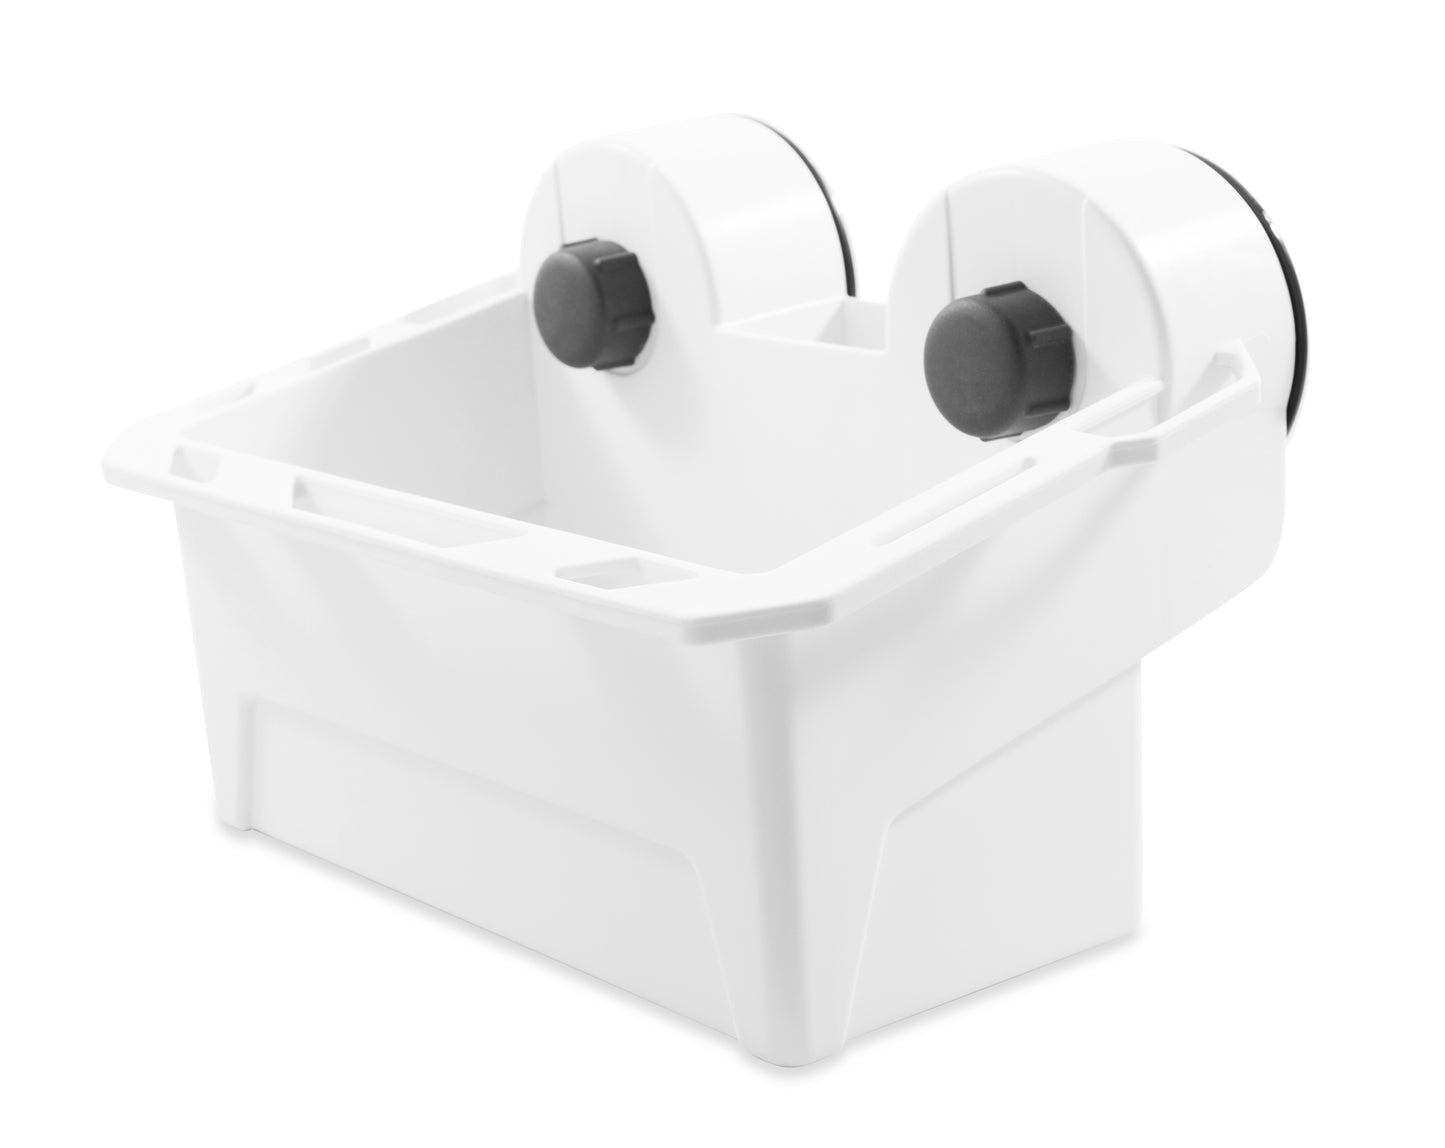 Camco Universal Mechanical Suction Cup Caddy - White